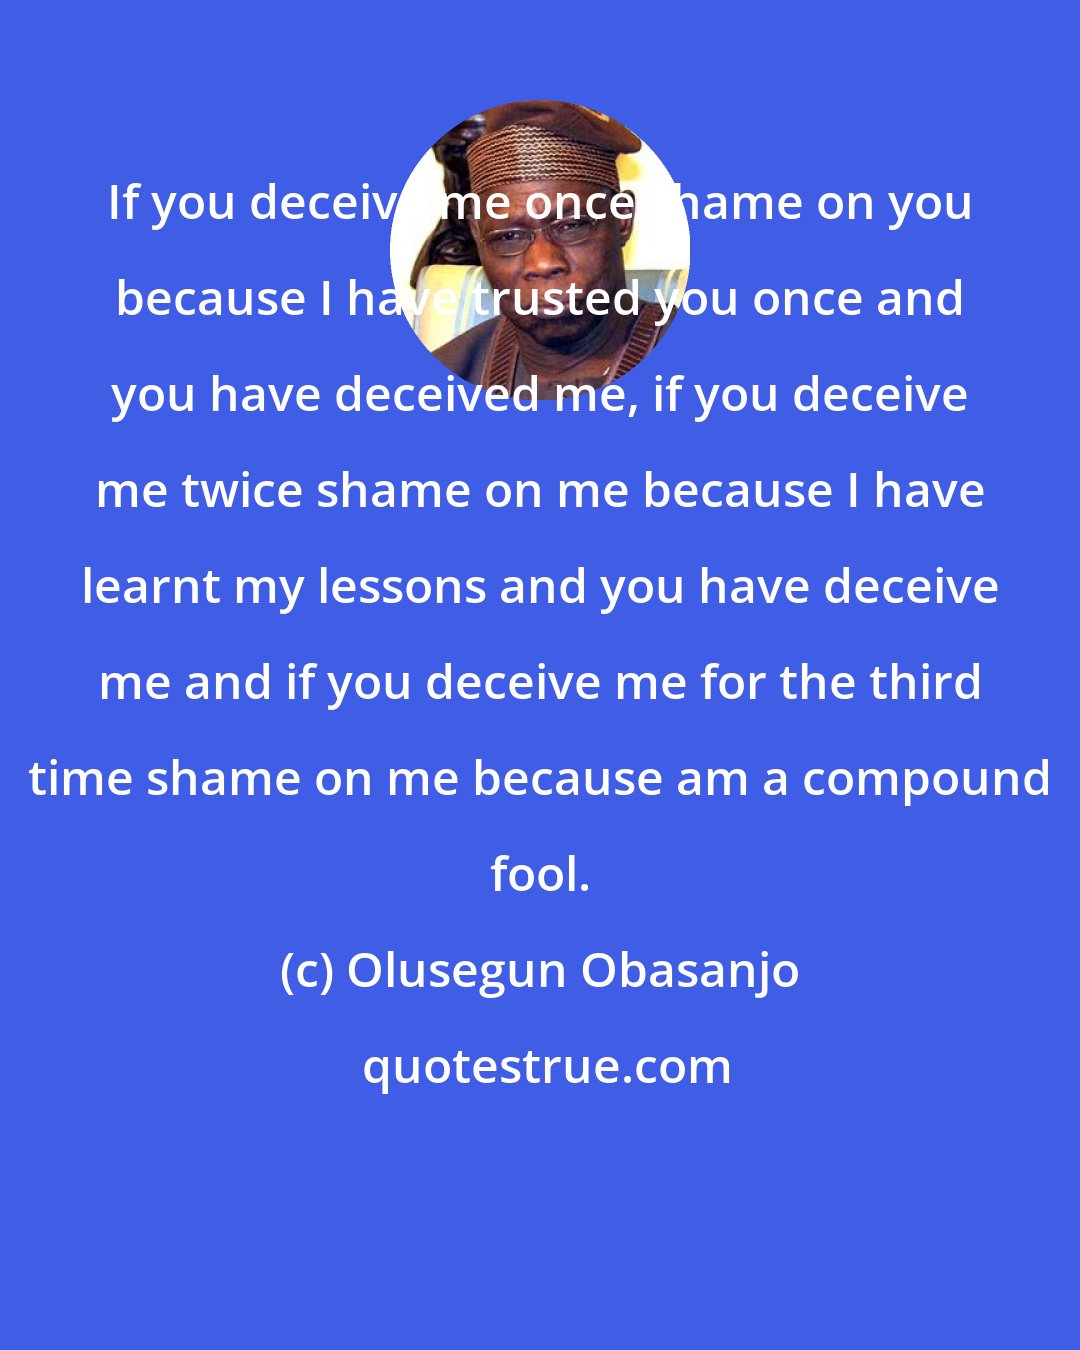 Olusegun Obasanjo: If you deceive me once shame on you because I have trusted you once and you have deceived me, if you deceive me twice shame on me because I have learnt my lessons and you have deceive me and if you deceive me for the third time shame on me because am a compound fool.